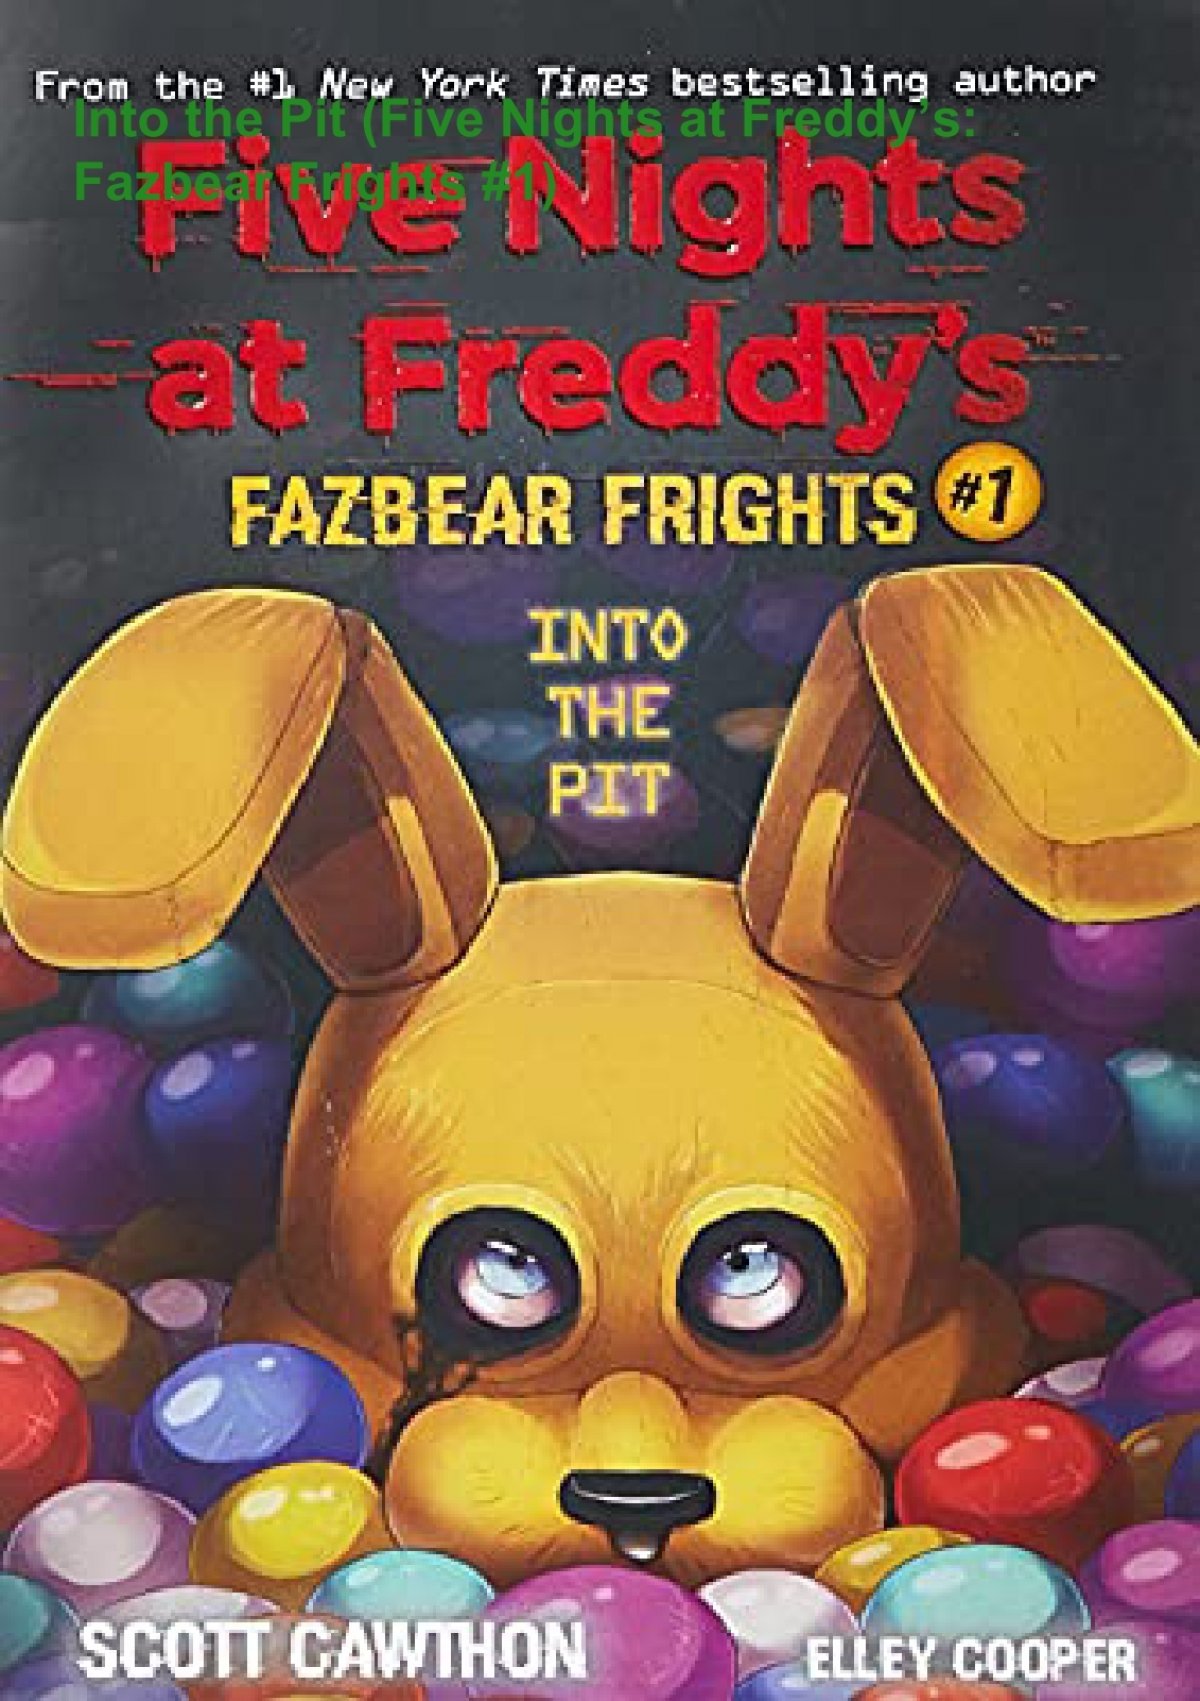 Into the Pit: An AFK Book (Five Nights at Freddy's: Fazbear Frights #1)  (English Edition) - eBooks em Inglês na